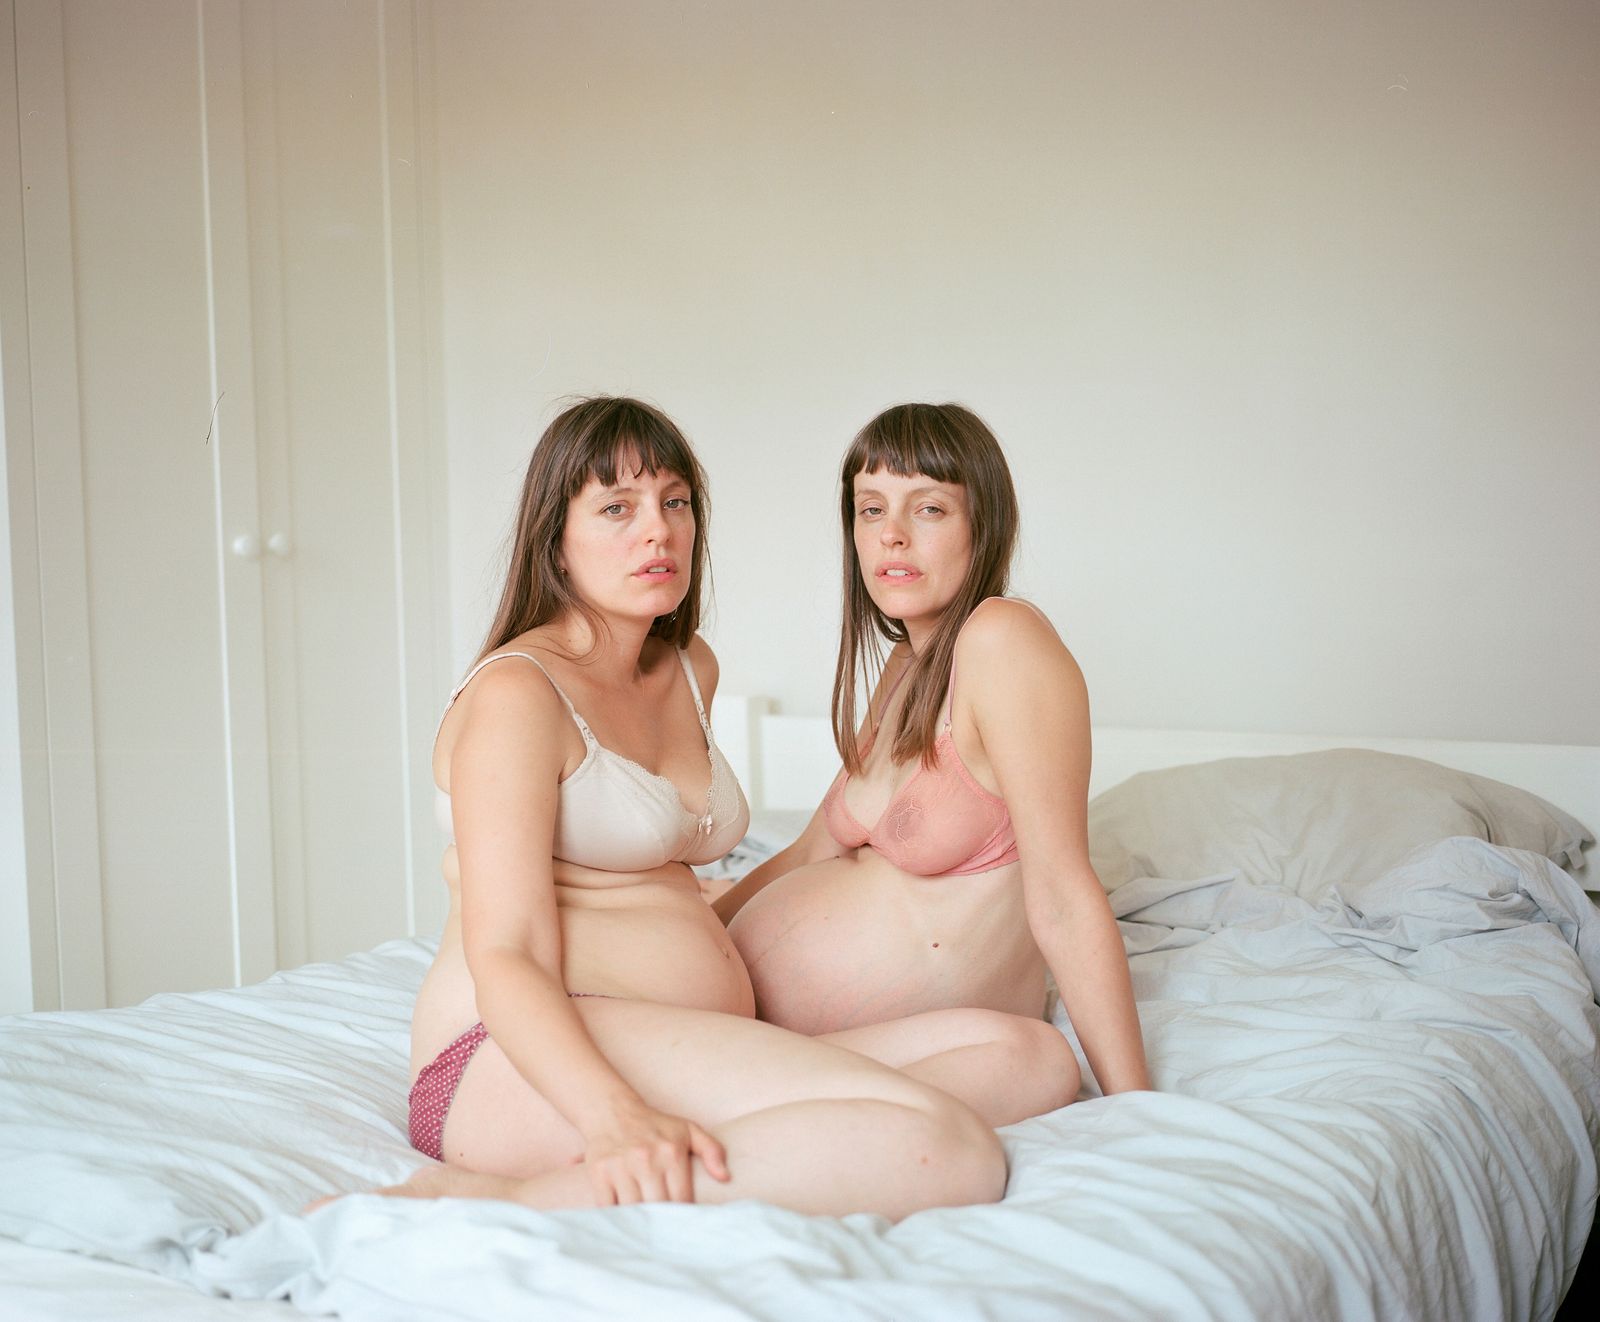 © Imogen Freeland - Image from the Birth of Mother photography project